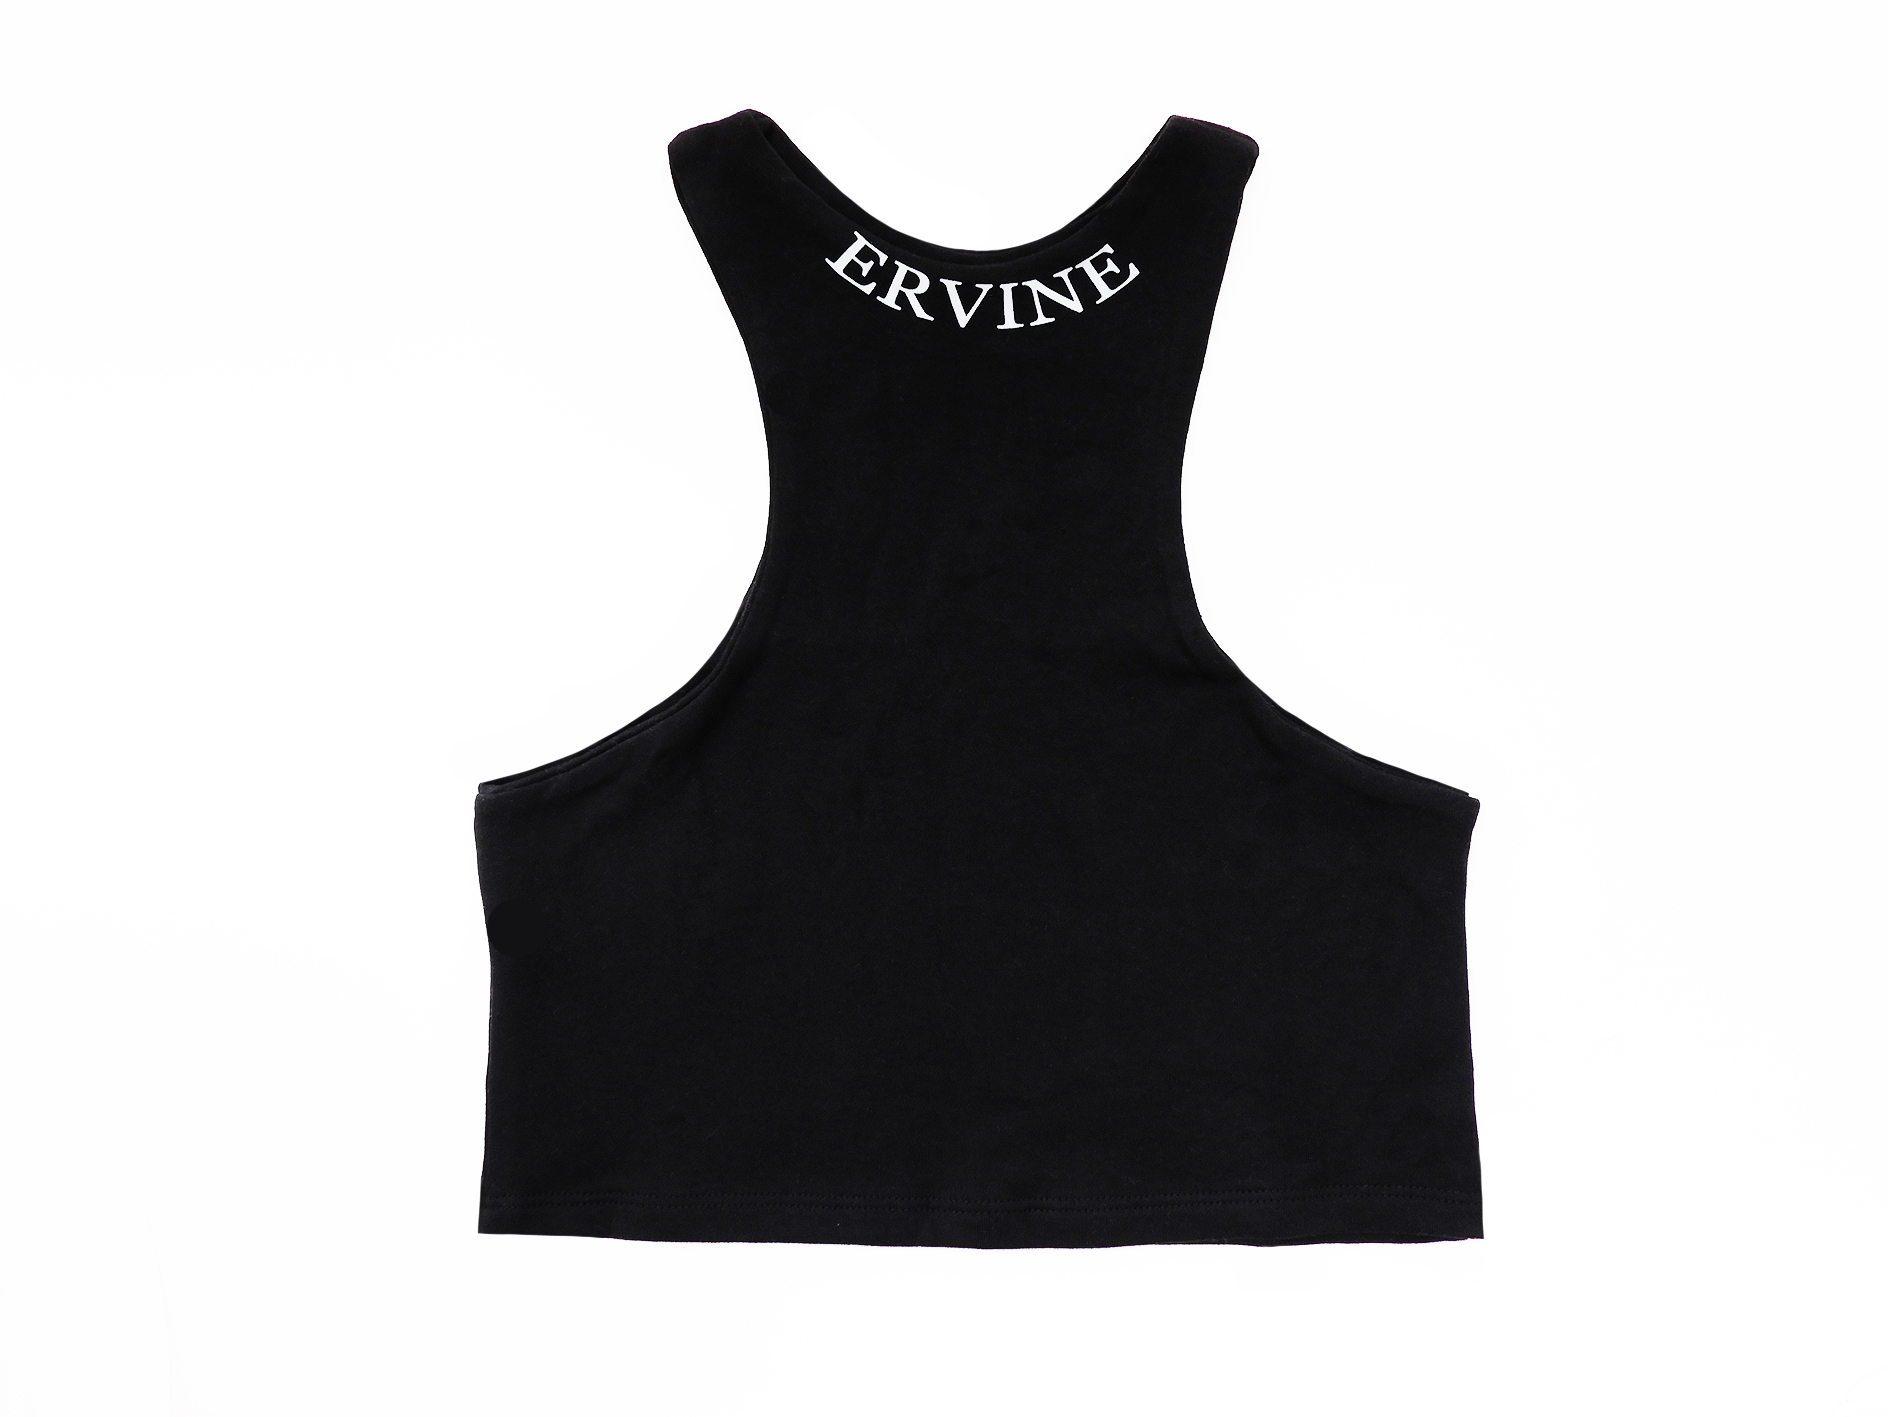 Black women's crop top in cotton fabric with reflective logo.